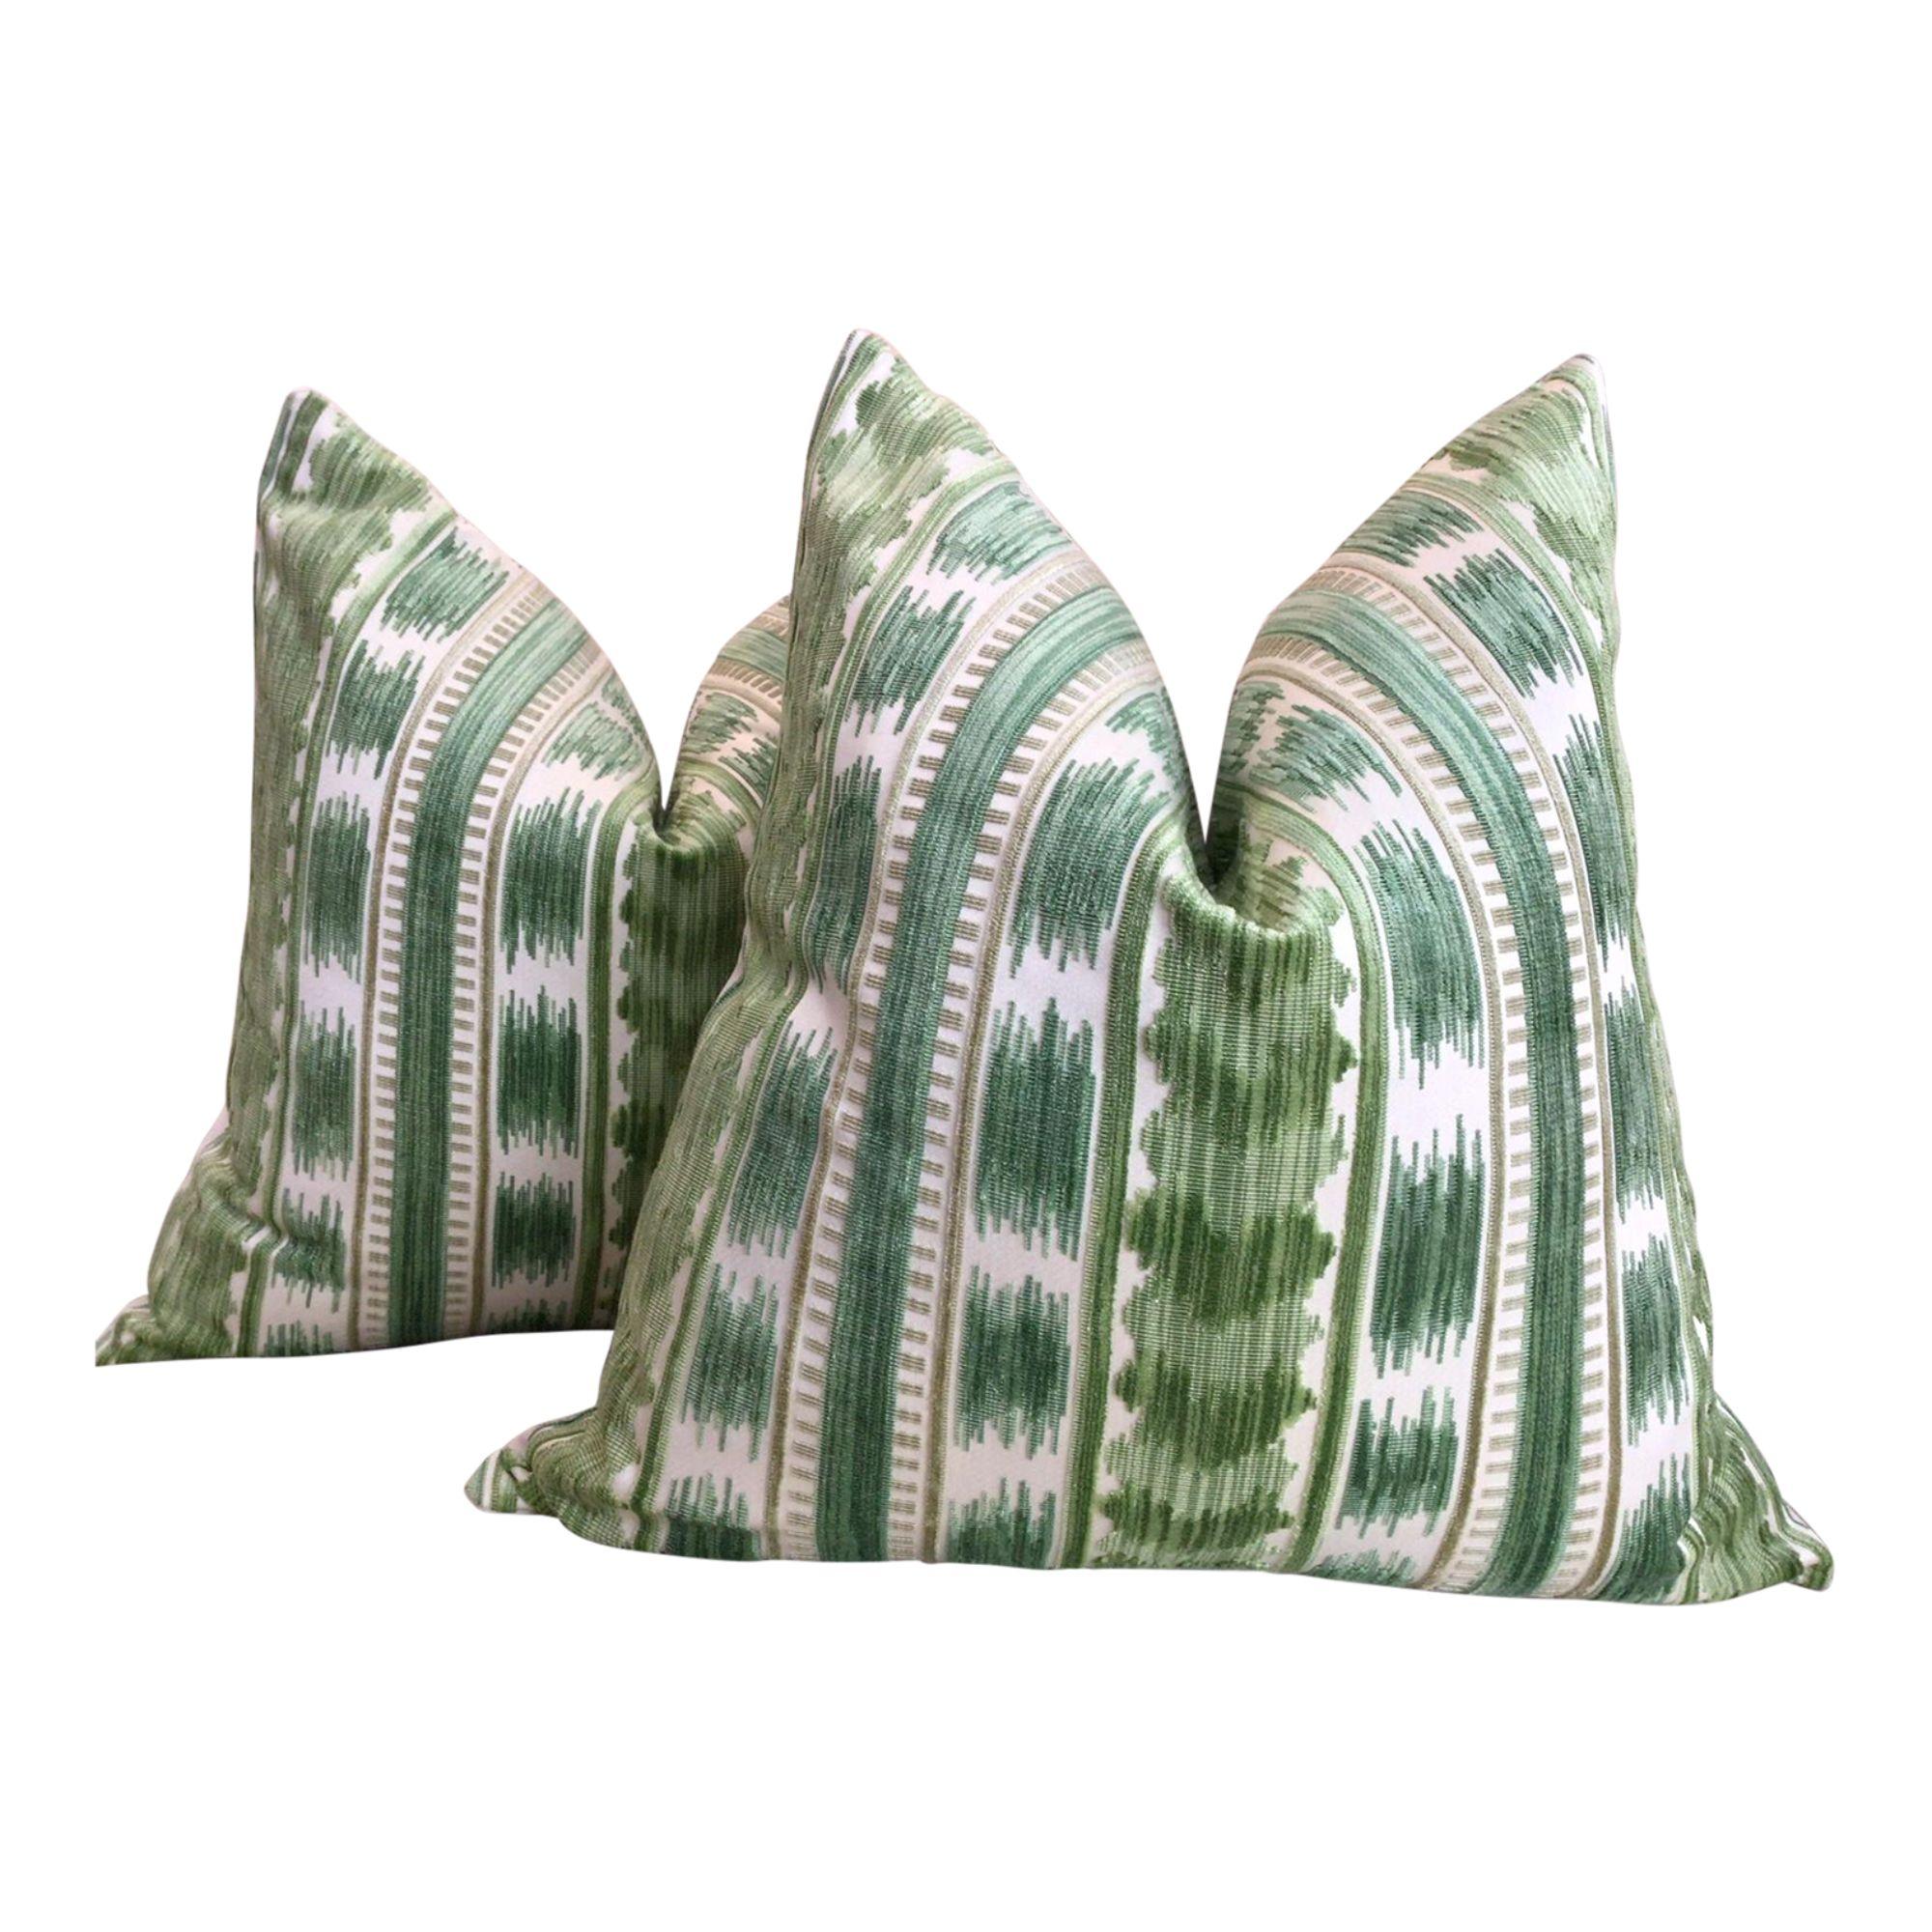 Brunschwig and Fils "Bayeaux" Velvet in Fern Pillows- a Pair For Sale